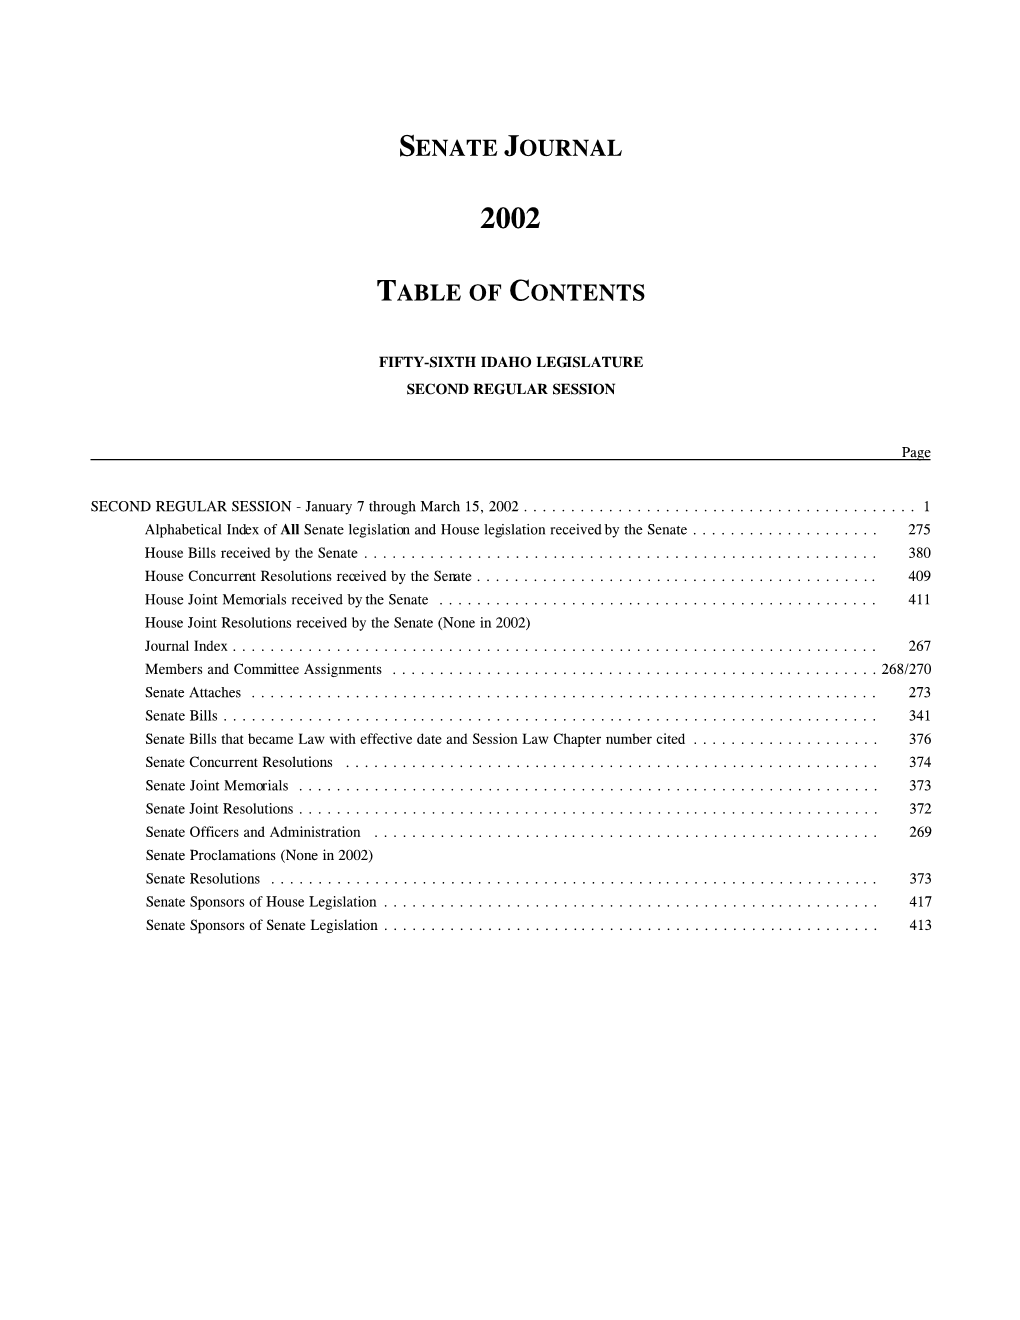 Senate Journal Table of Contents